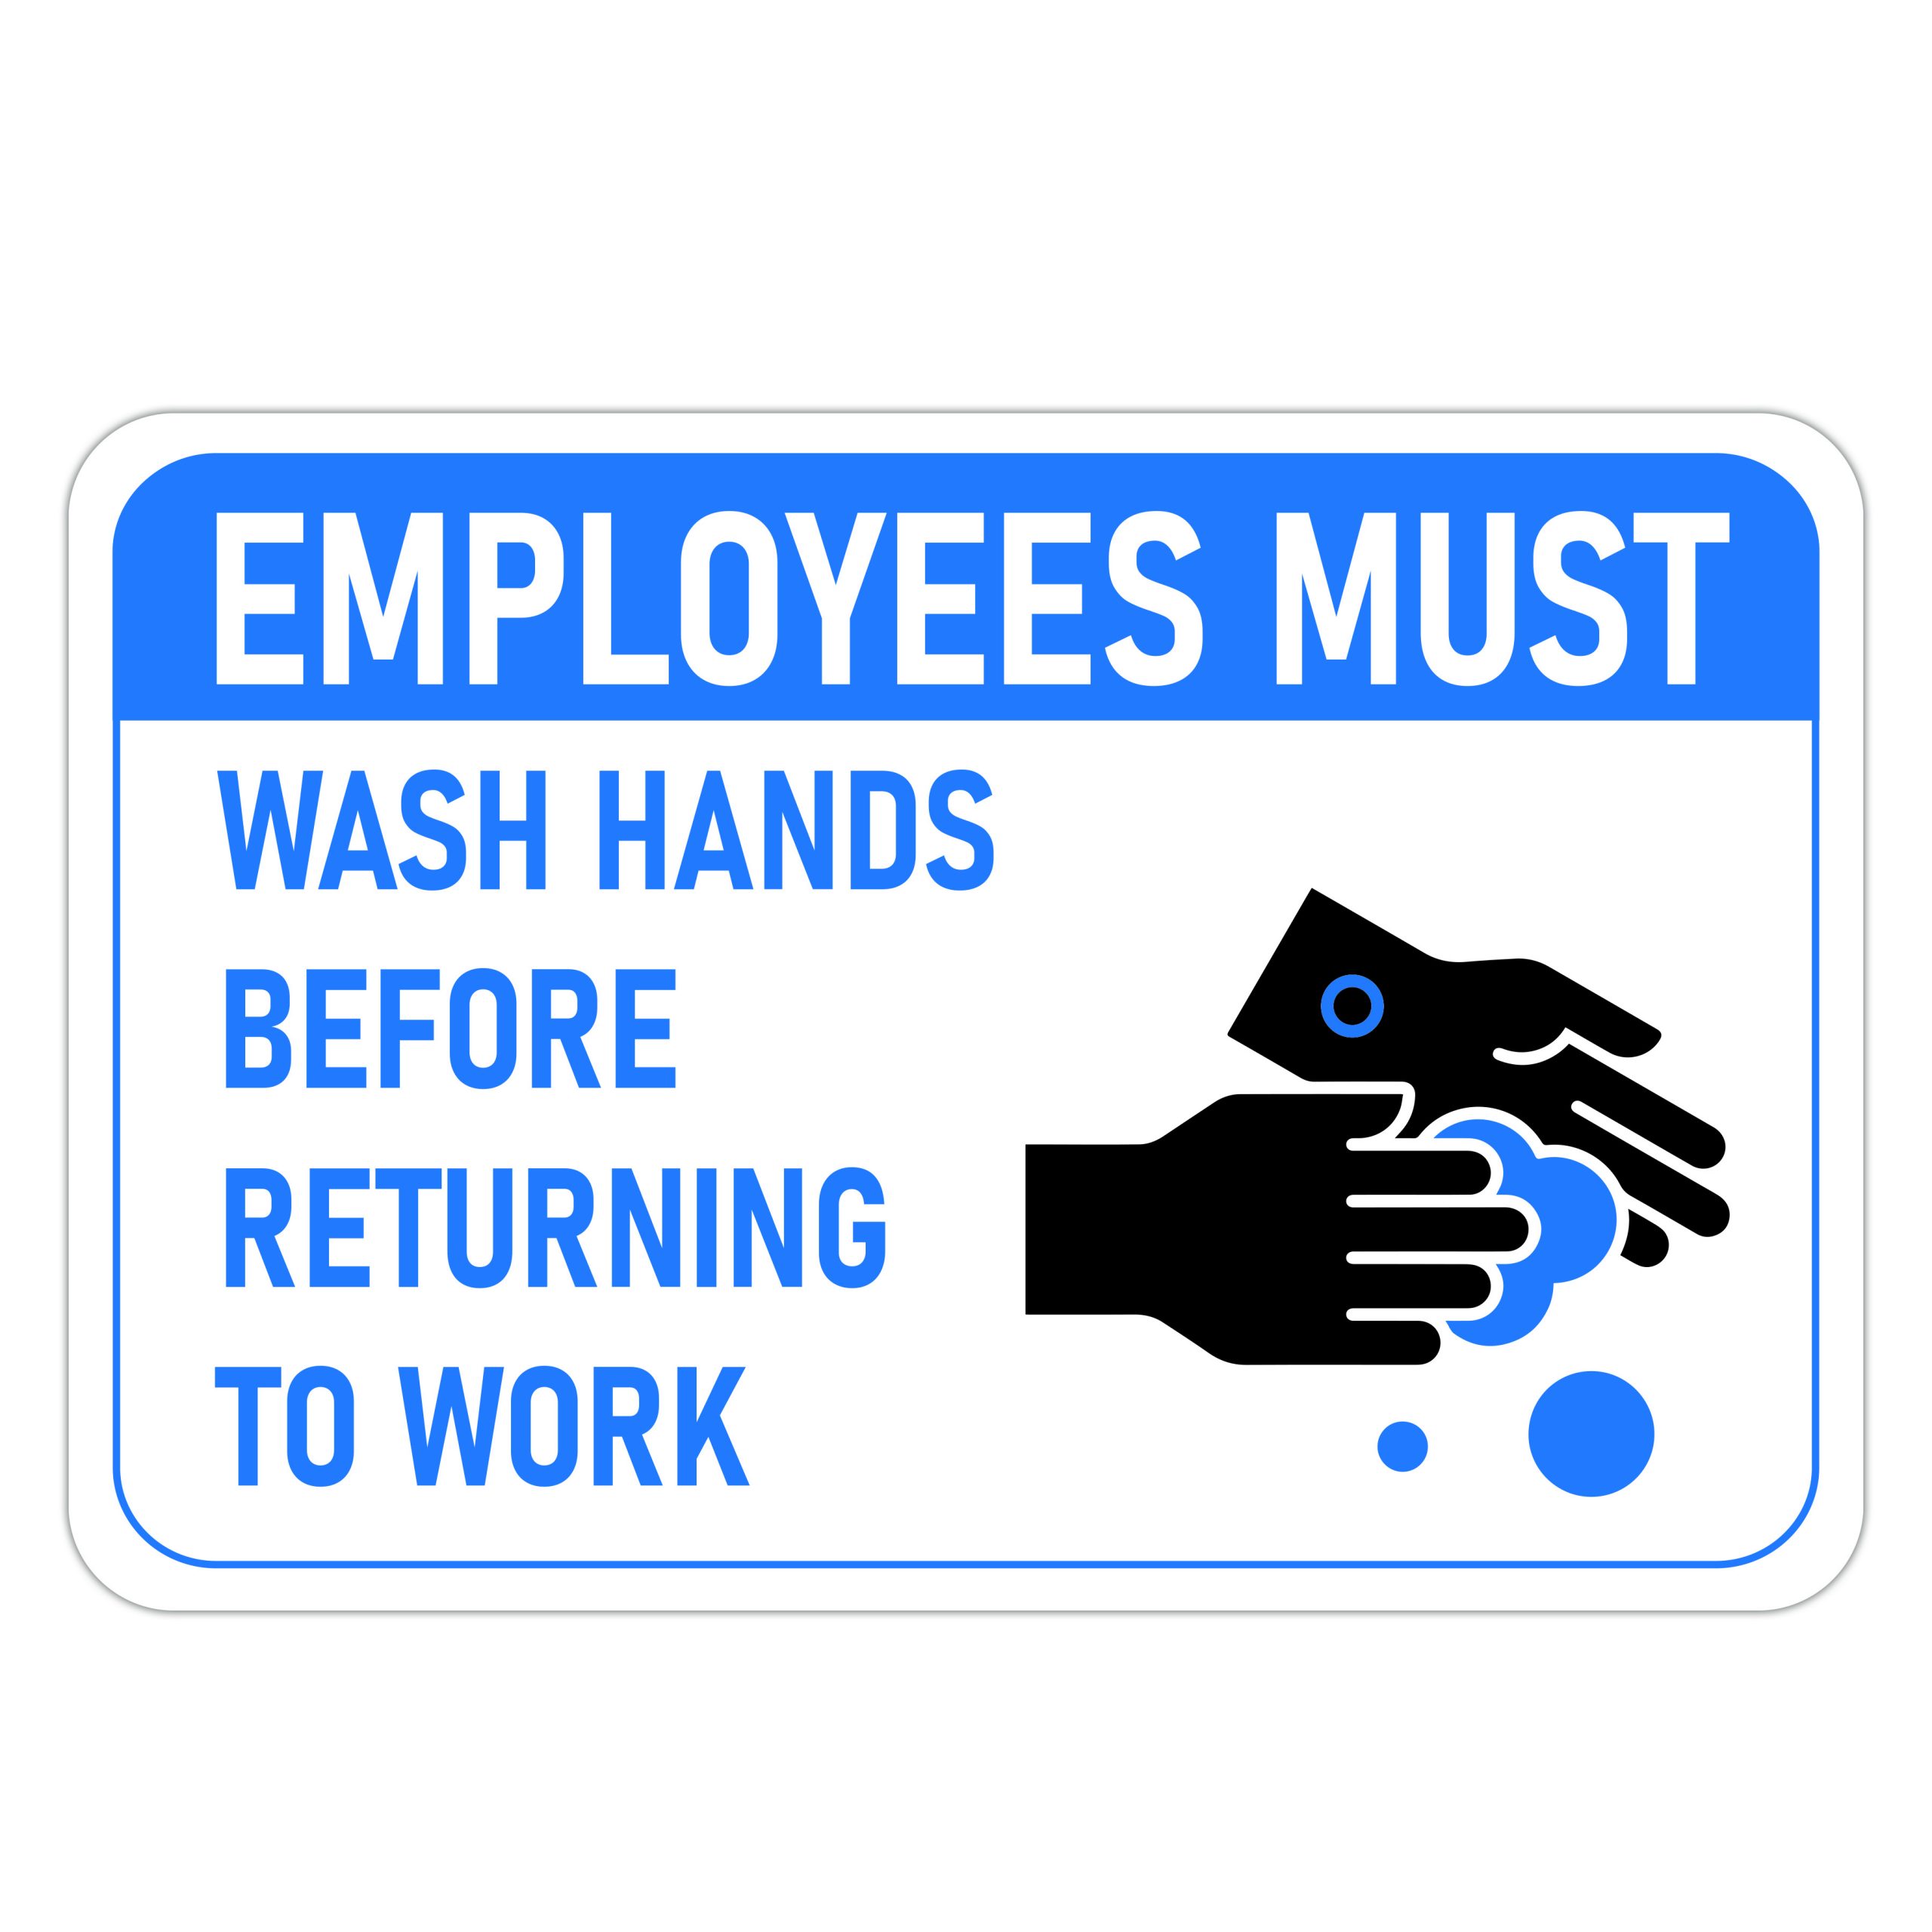 EMPLOYEES MUST WASH HANDS American Sign Company